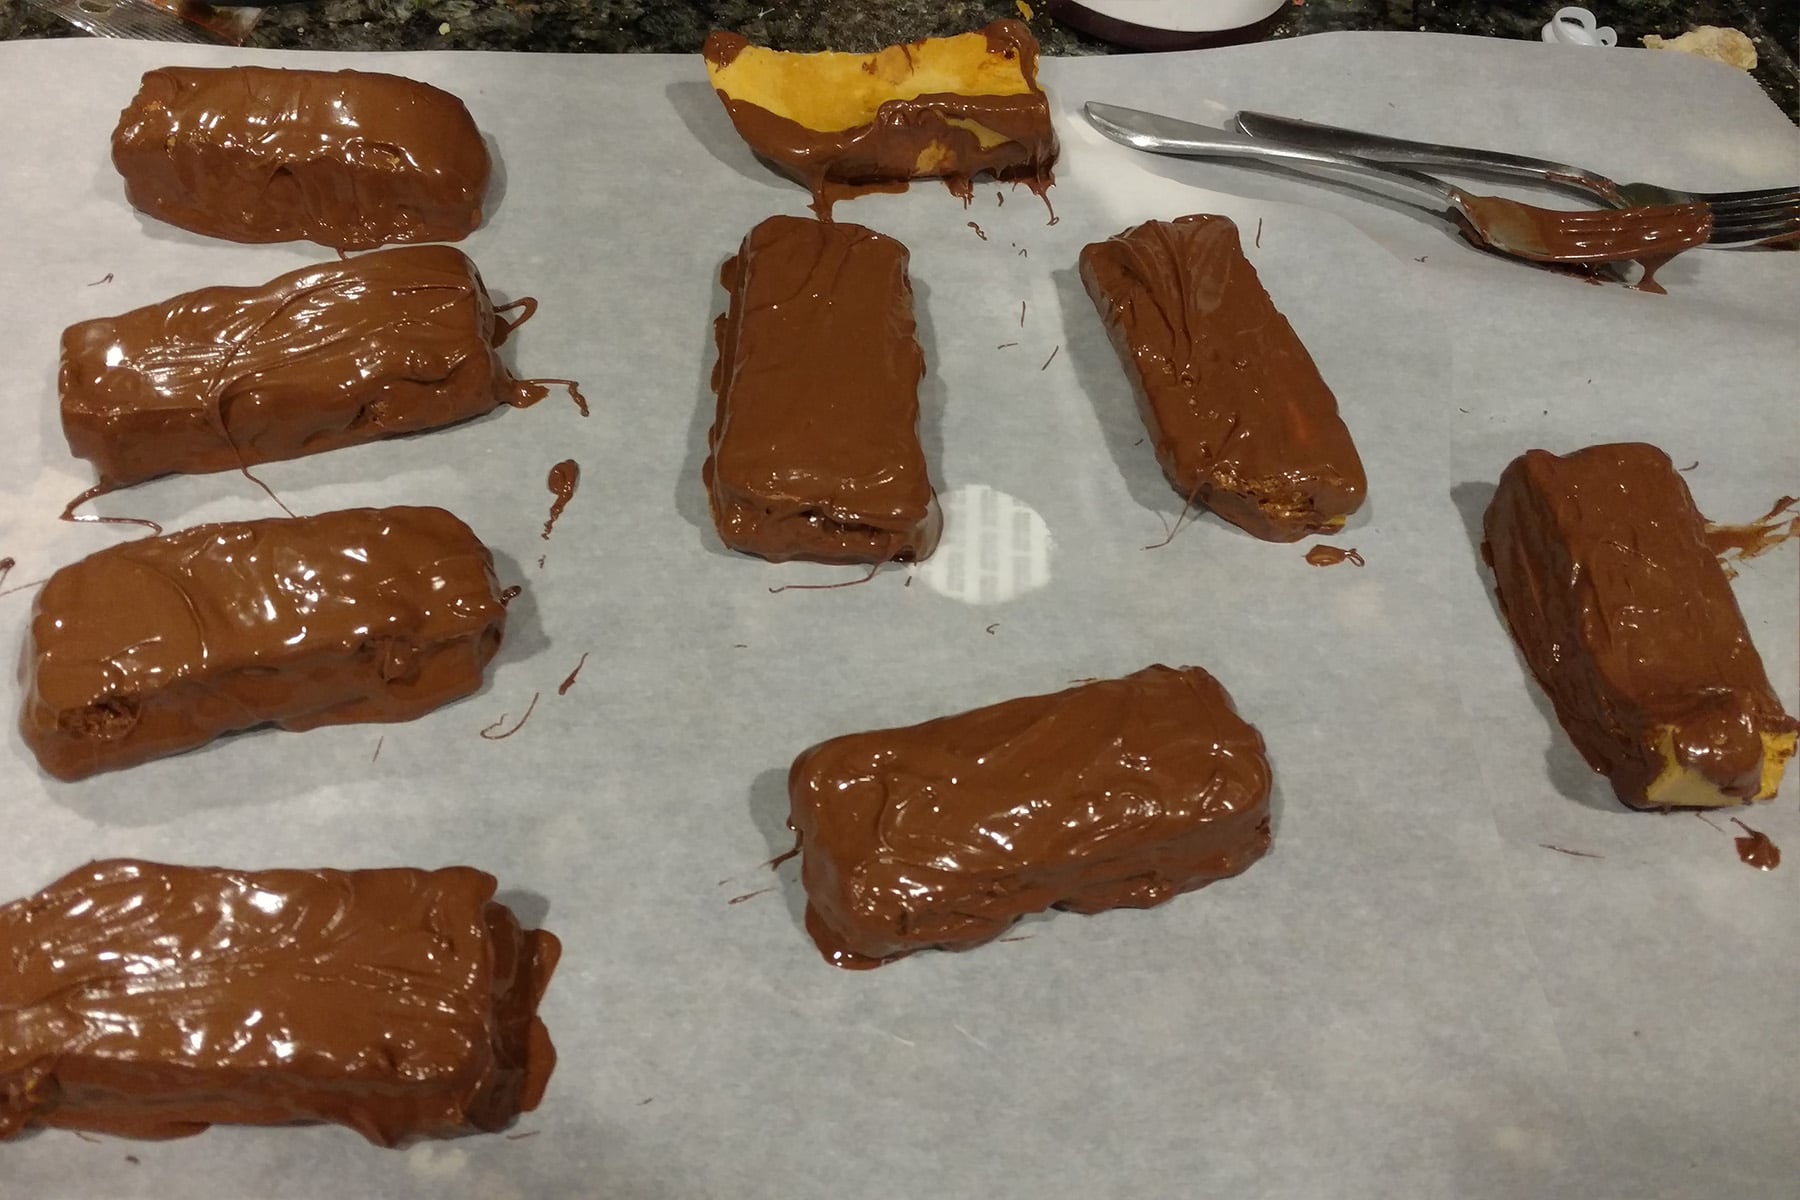 Freshly dipped bars of honeycomb toffee, coated in chocolate.